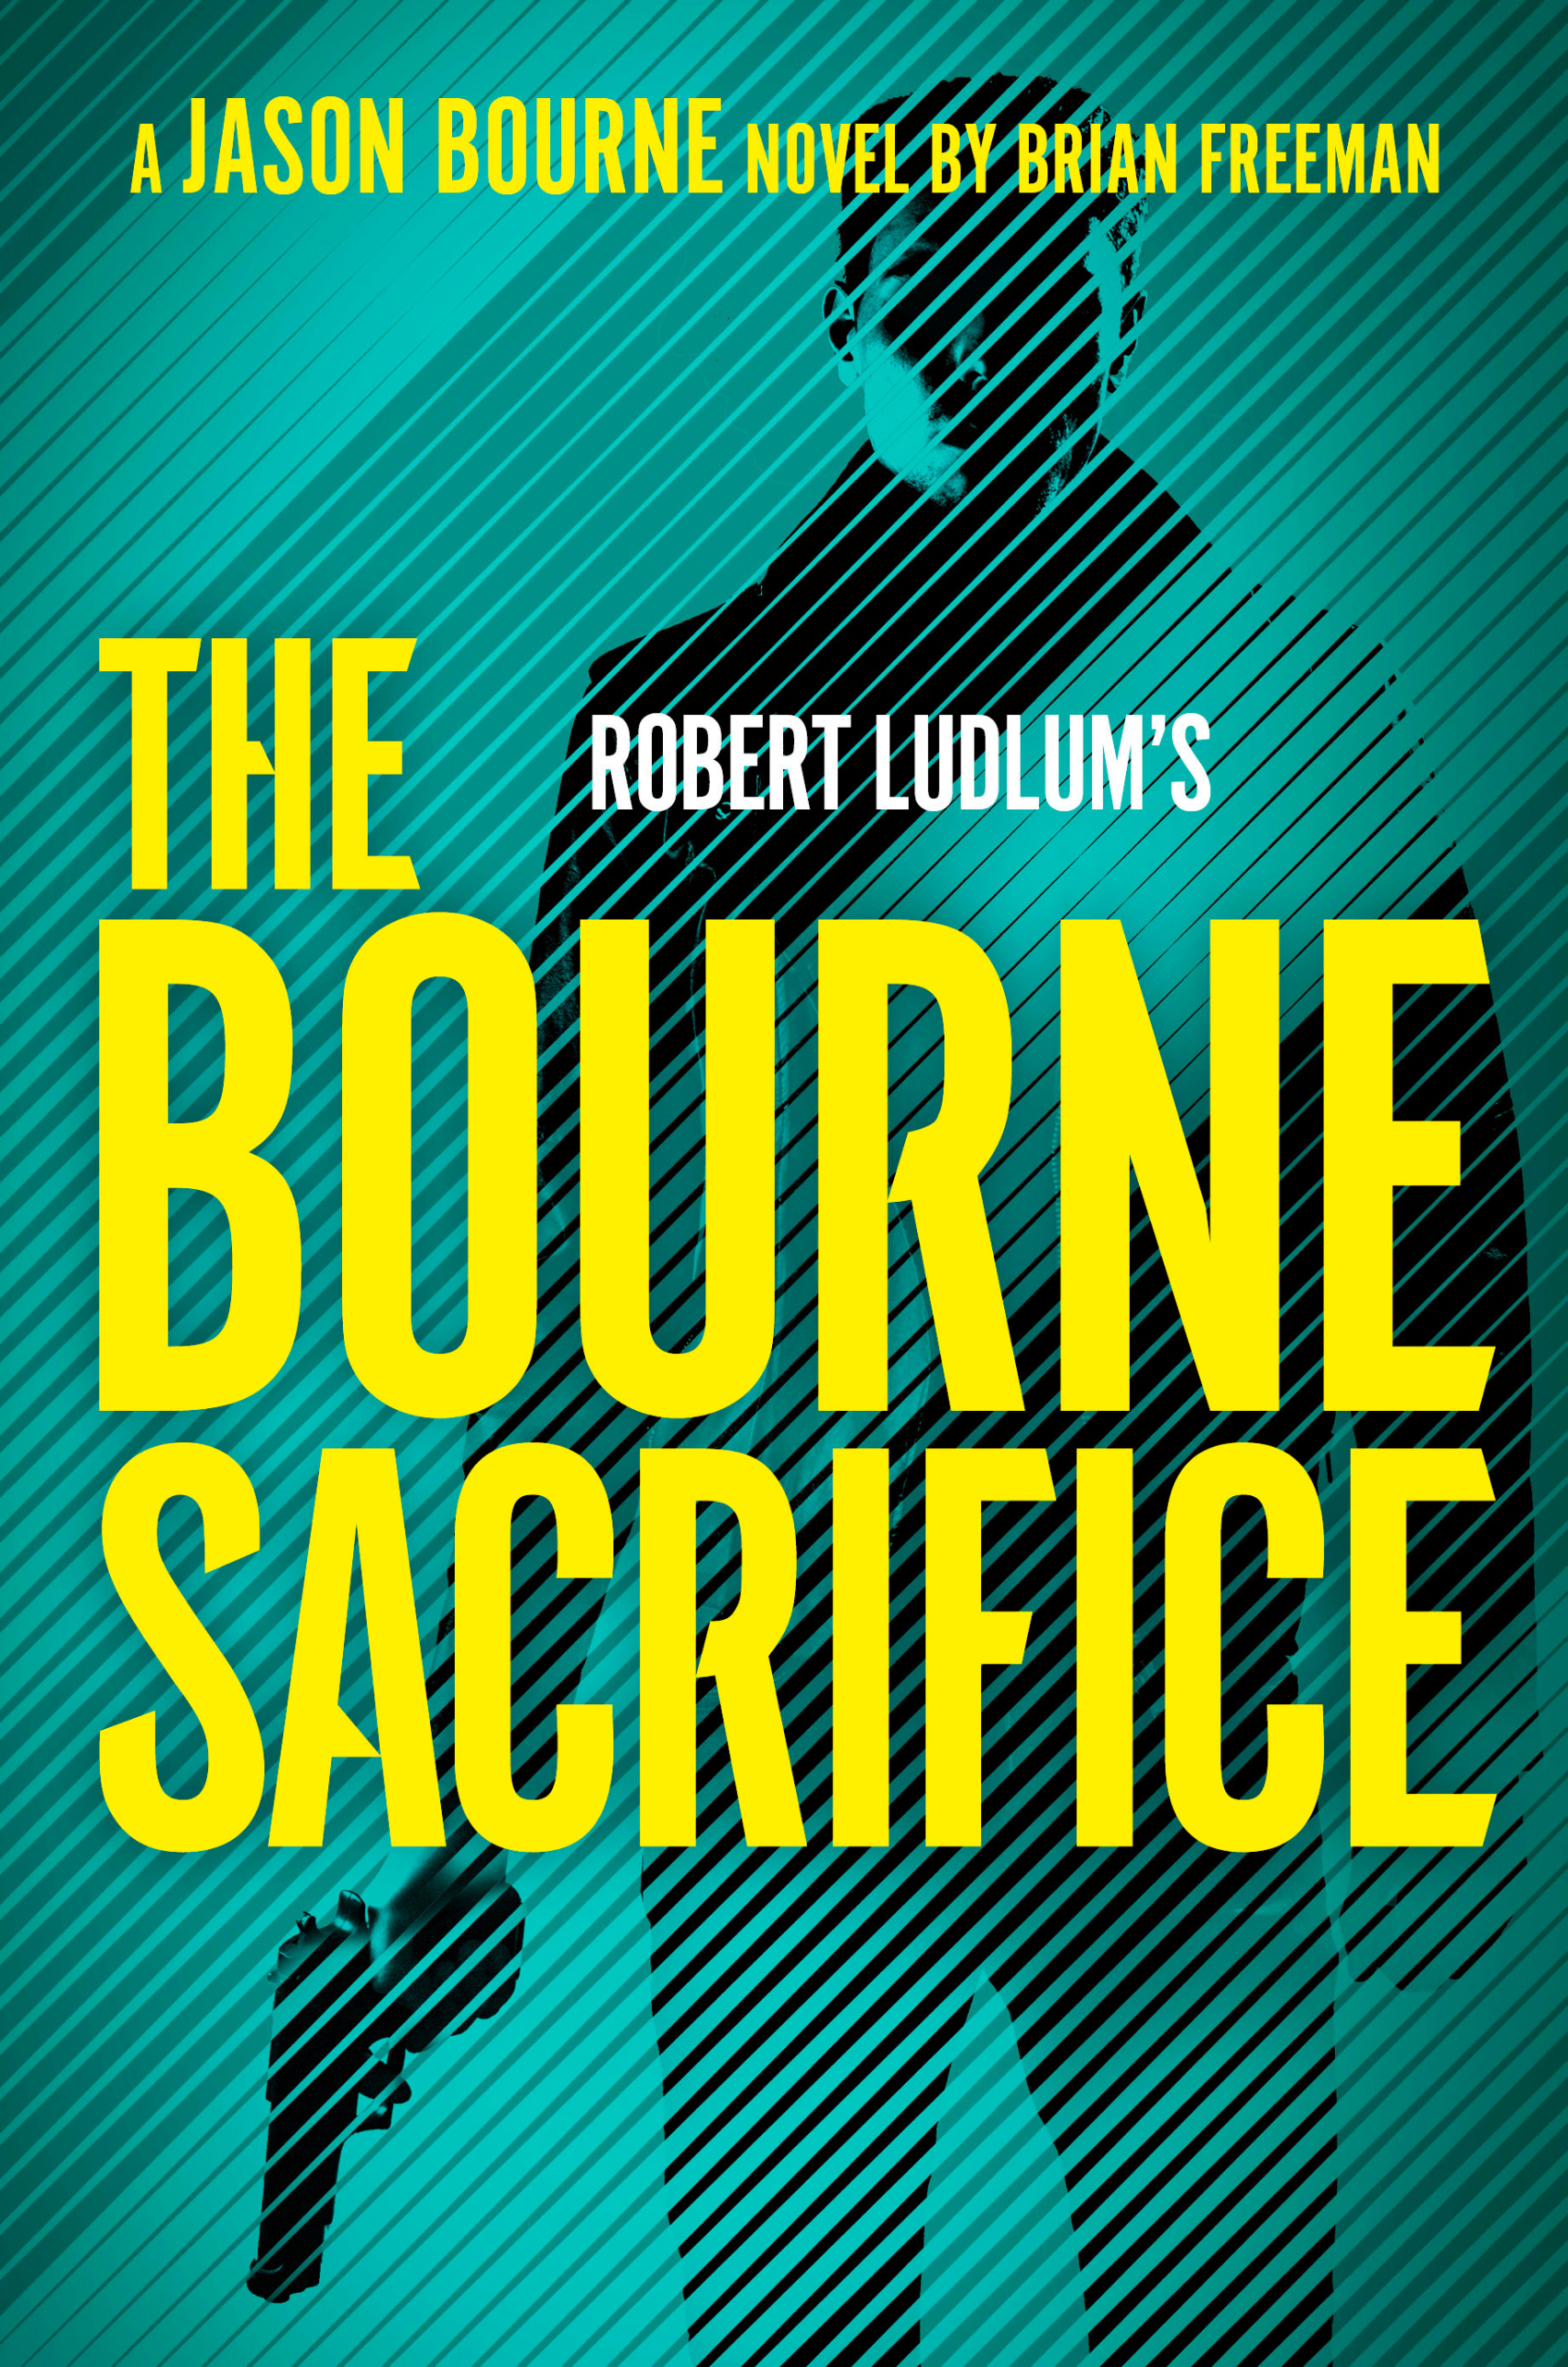 Jason Bourne faces the reader dead-on, his body in silhouette, a gun in his hand. The title THE BOURNE SACRIFICE is in yellow against a background of green diagonal lines.